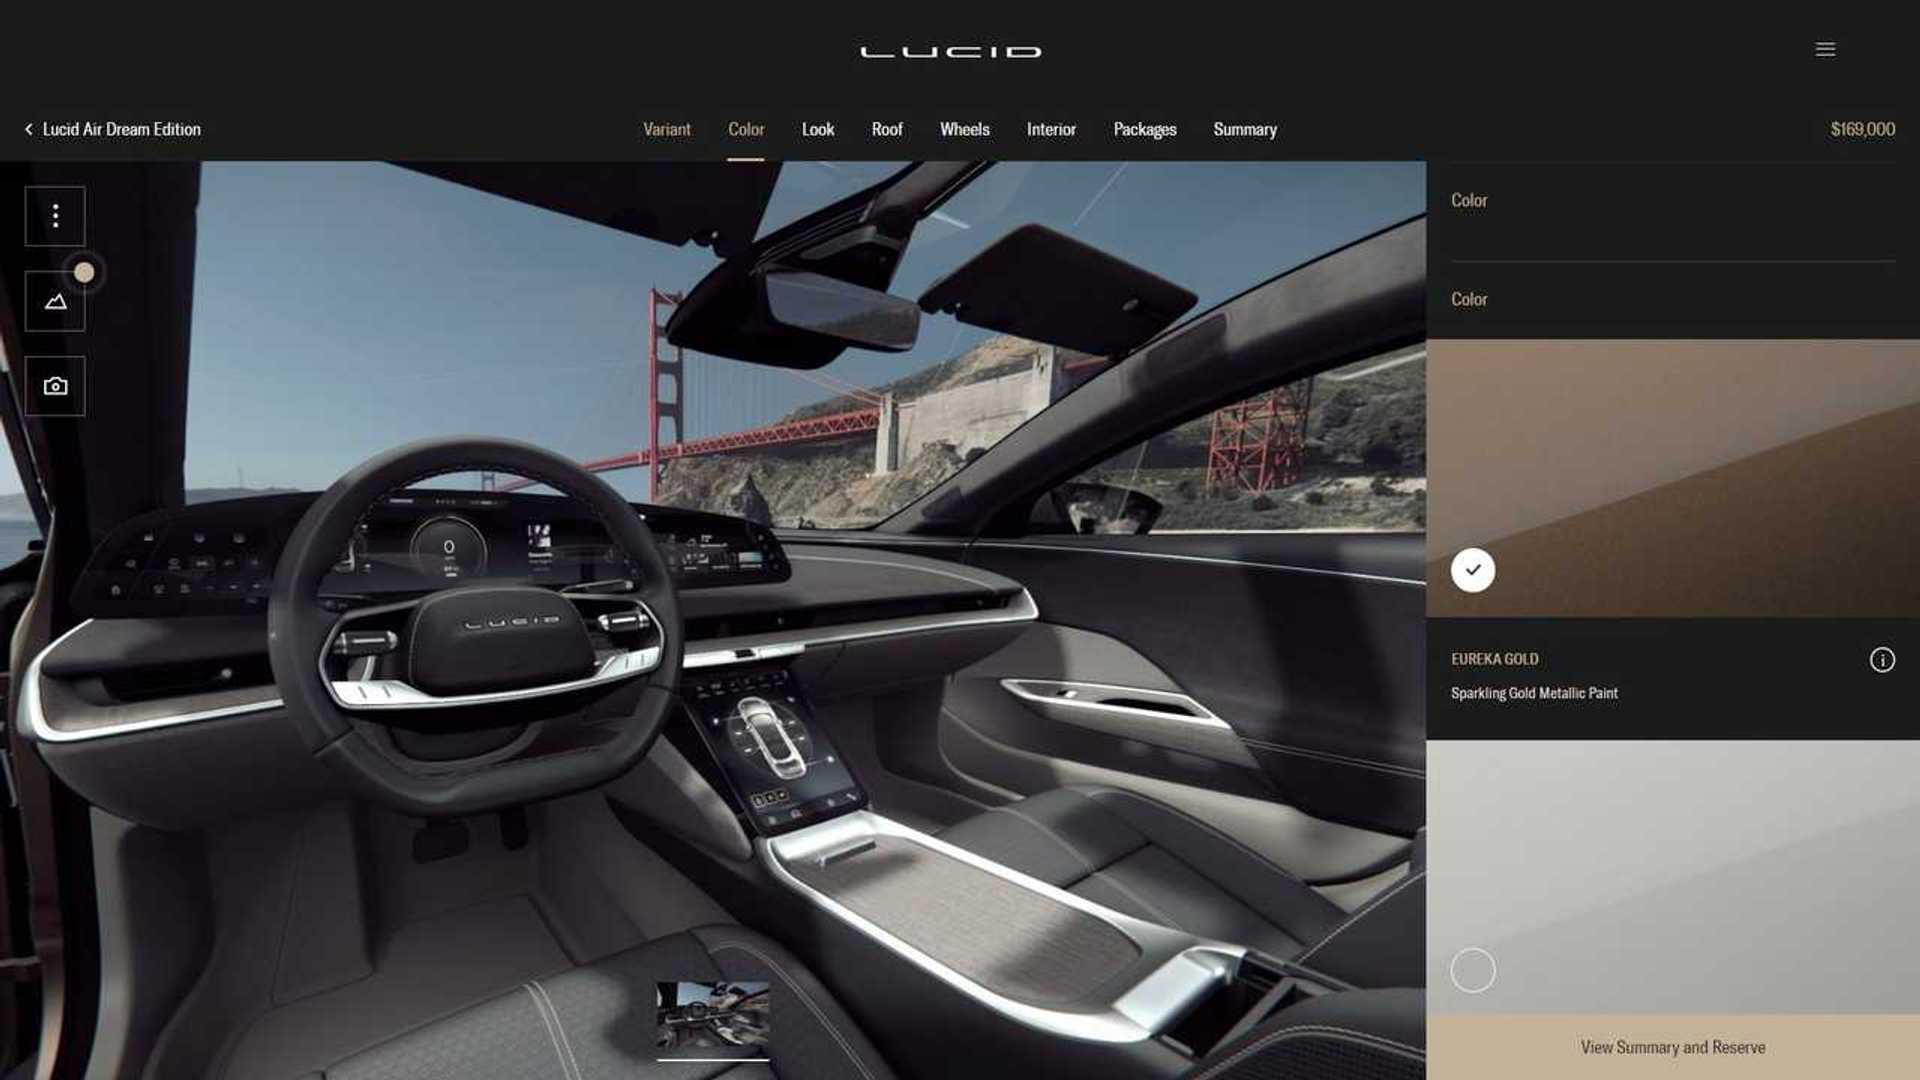 lucid-air-s-configurator-does-not-reveal-packages-pricing.jpg